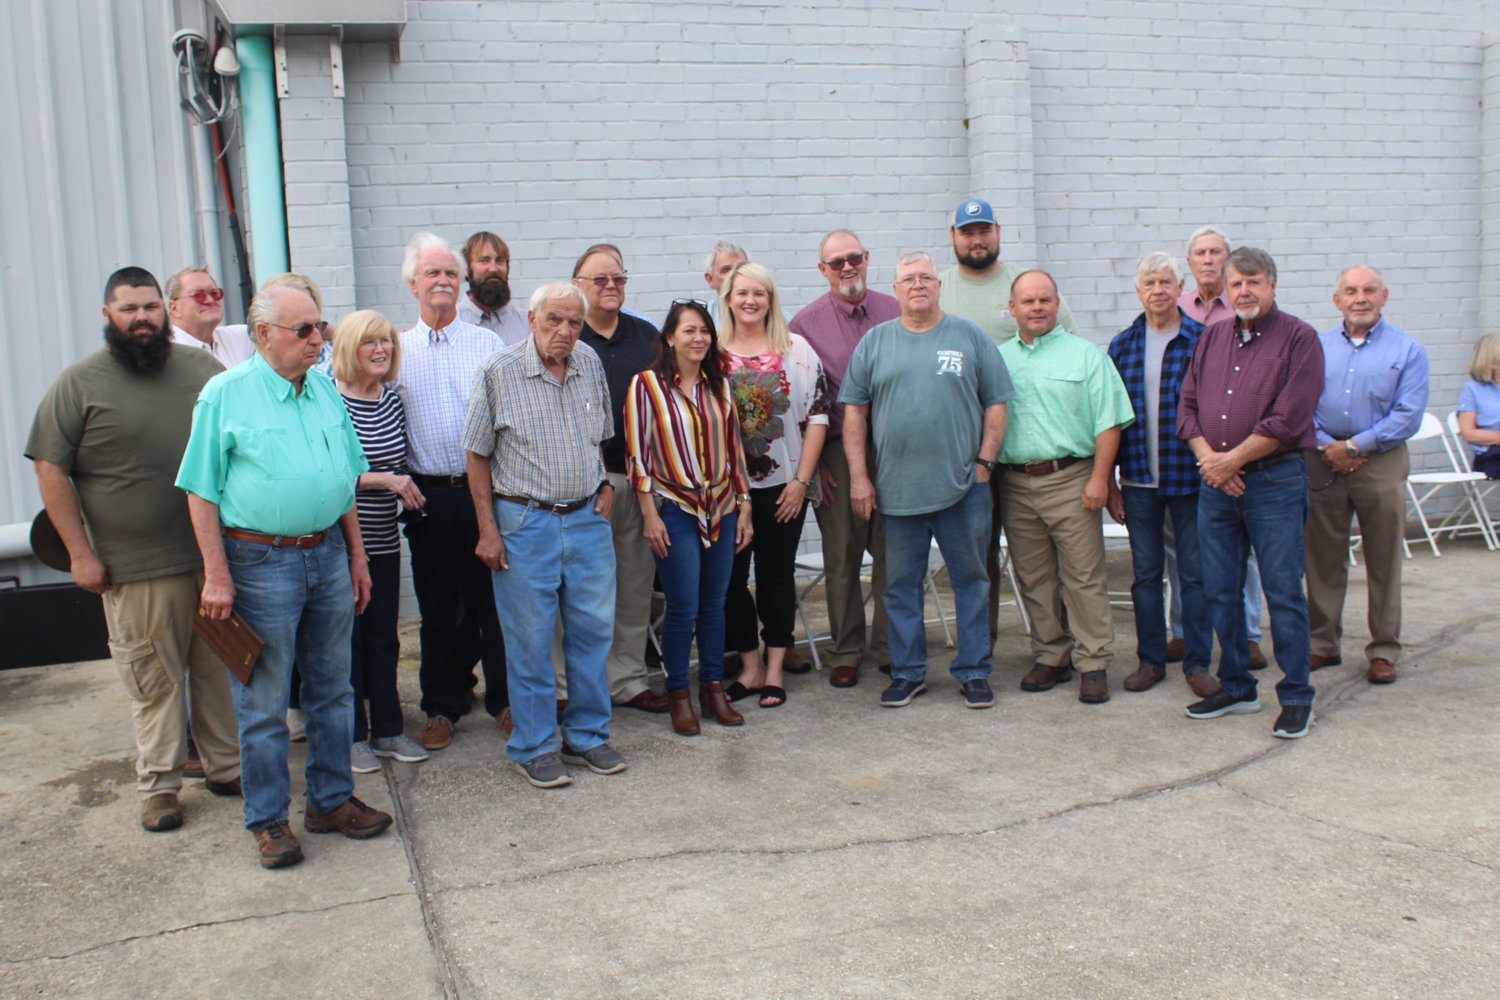 Owner Nelson Wingo with both current and past employees at Campbell’s Hardware & Sporting Goods.